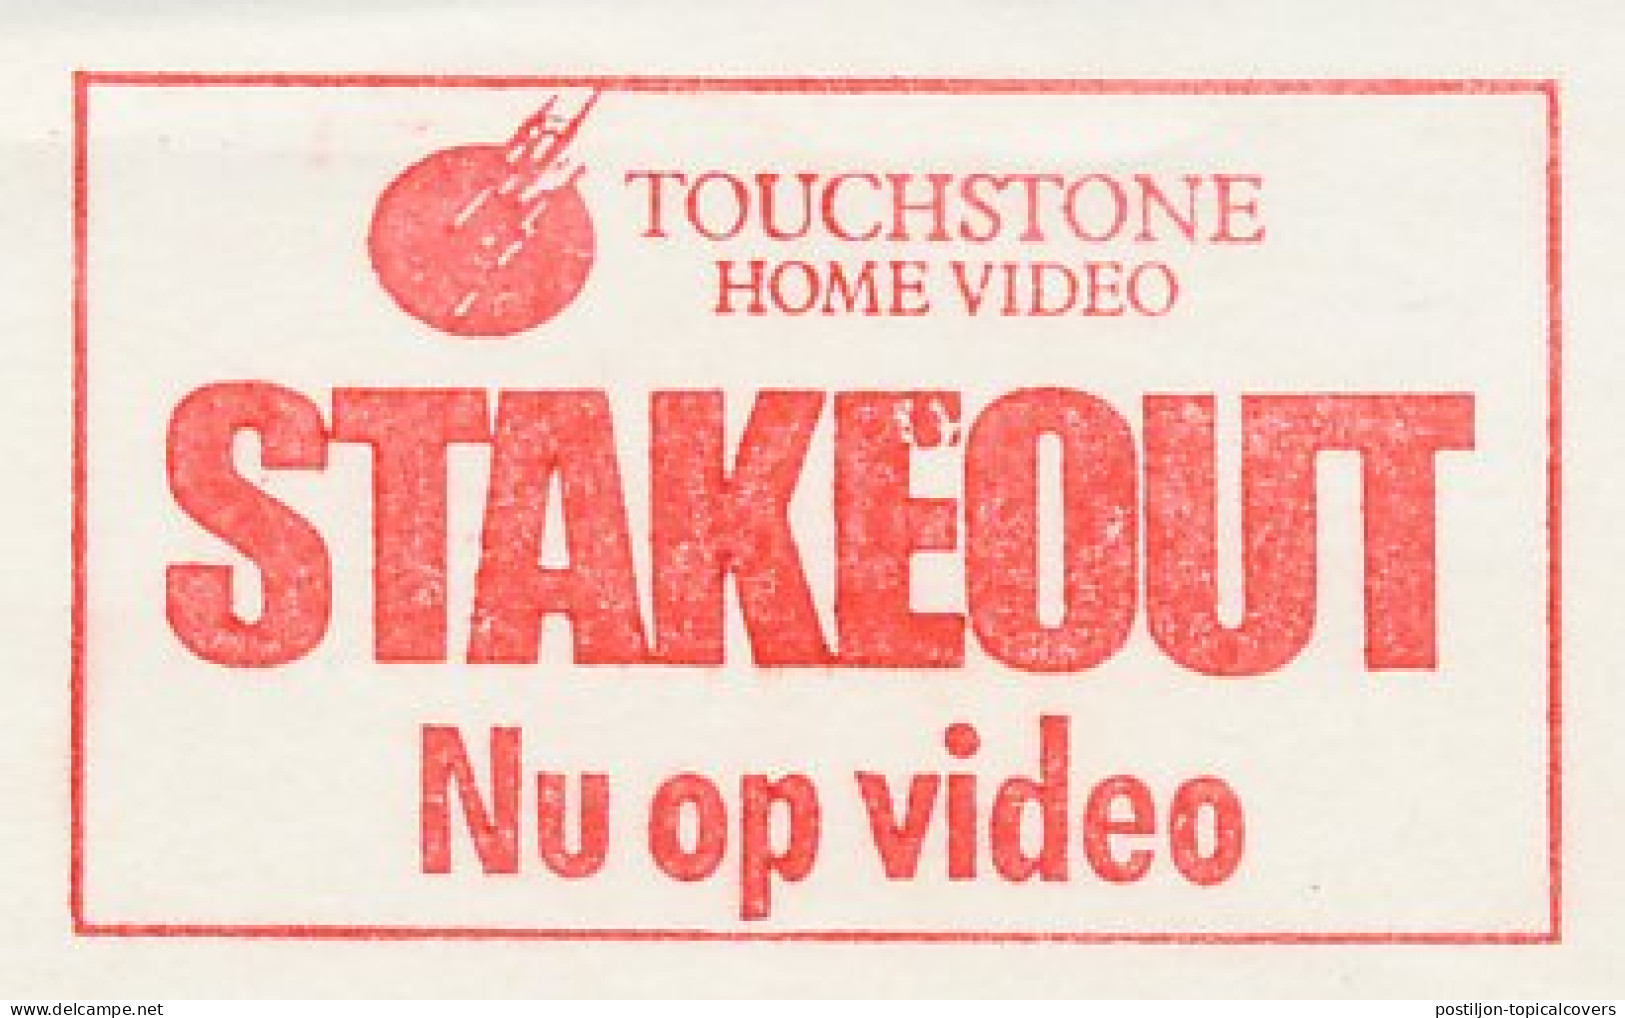 Meter Cut Netherlands 1988 Stakeout - Movie - Cinema